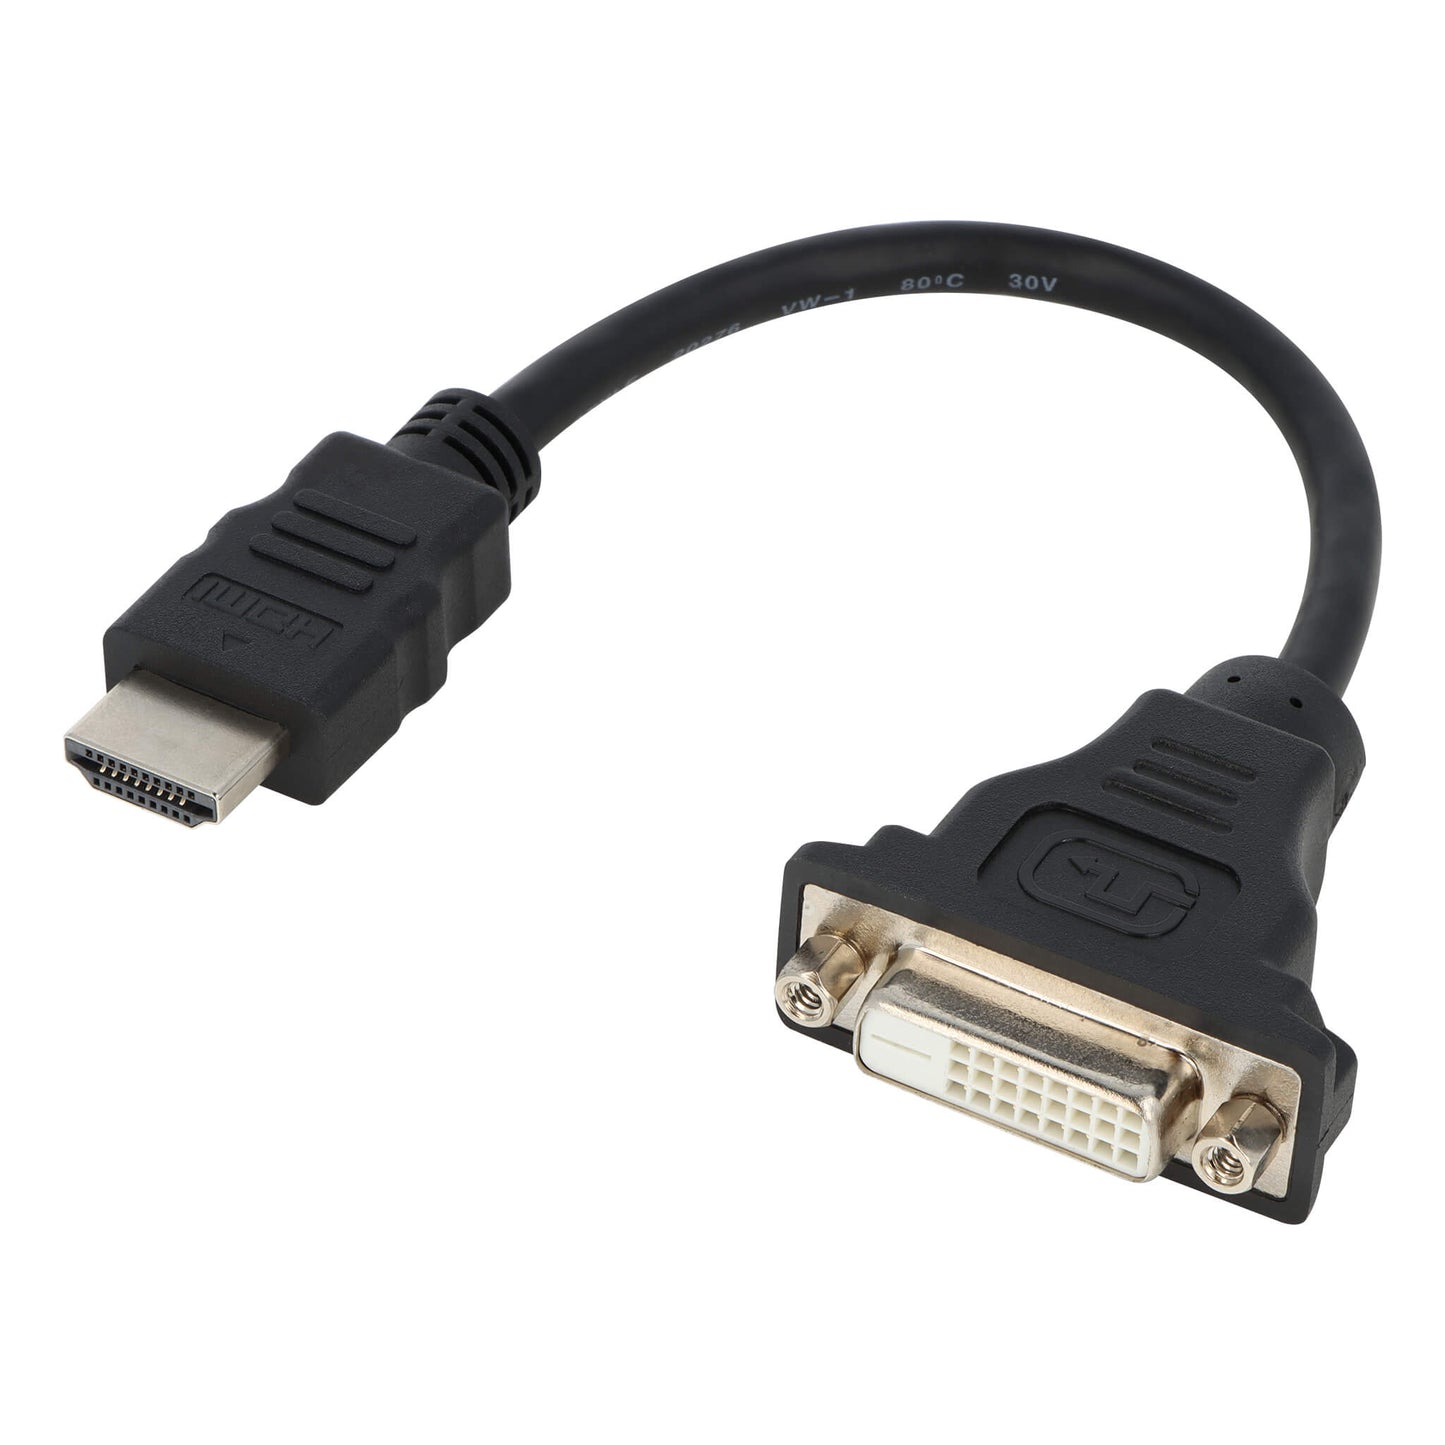 HDMI to DVI-D Video Cable Adapter - M/F